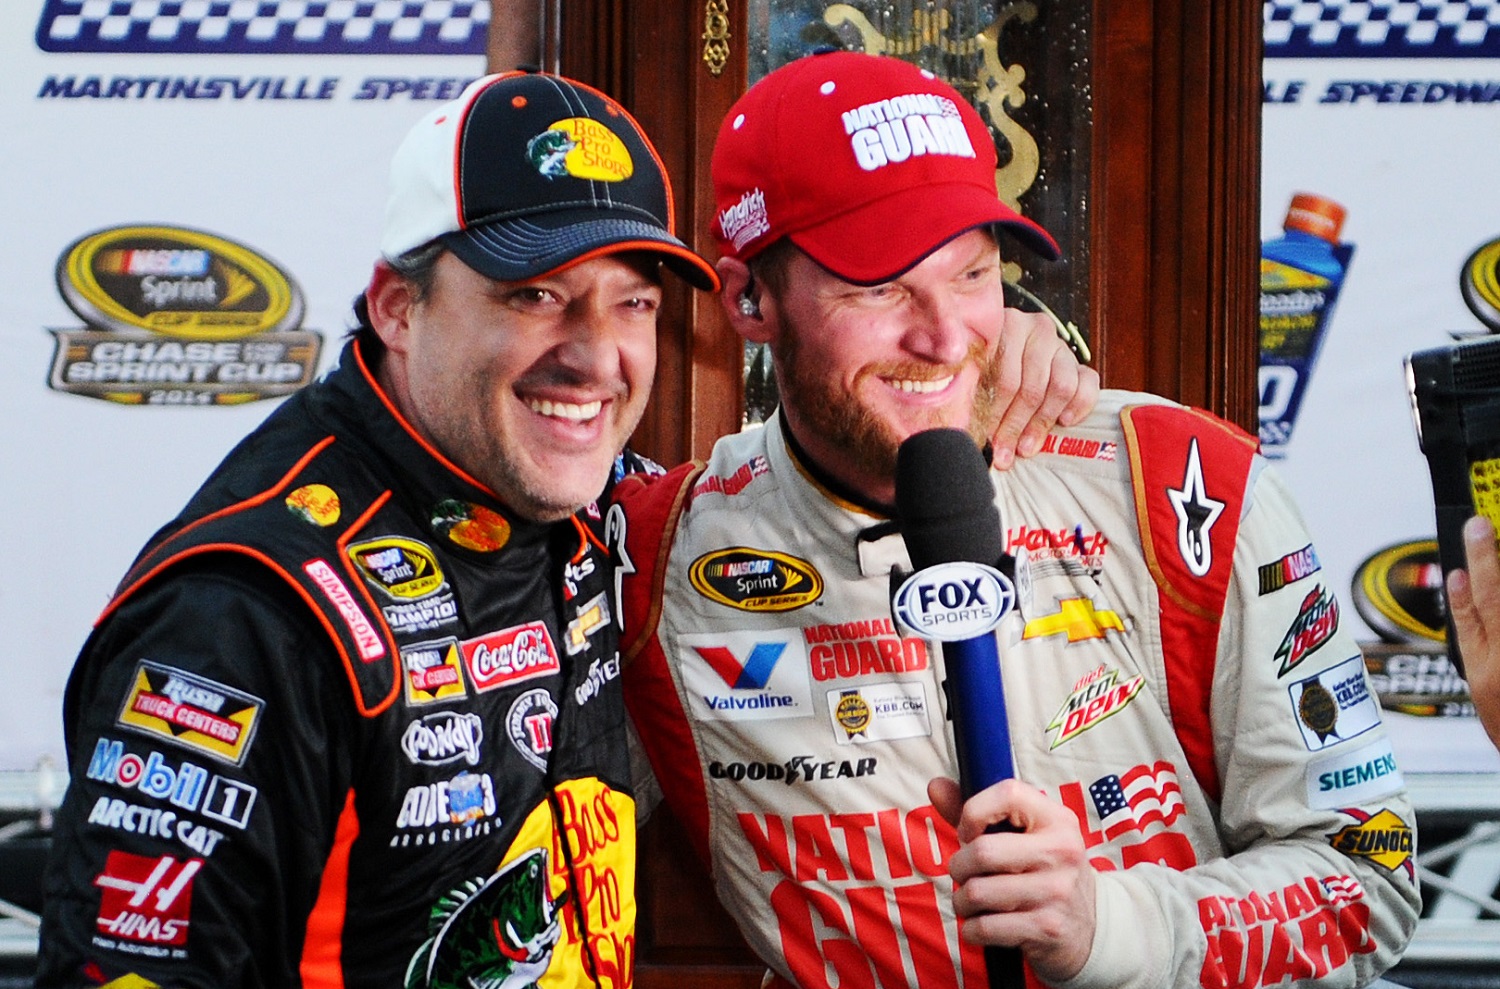 Tony Stewart, left, embraces Dale Earnhardt Jr. after the latter's victory in the NASCAR Sprint Cup Series Goody's Headache Relief Shot 500 at Martinsville Speedway on Oct. 26, 2014, in Martinsville, Virginia. | Robert Laberge/NASCAR via Getty Images